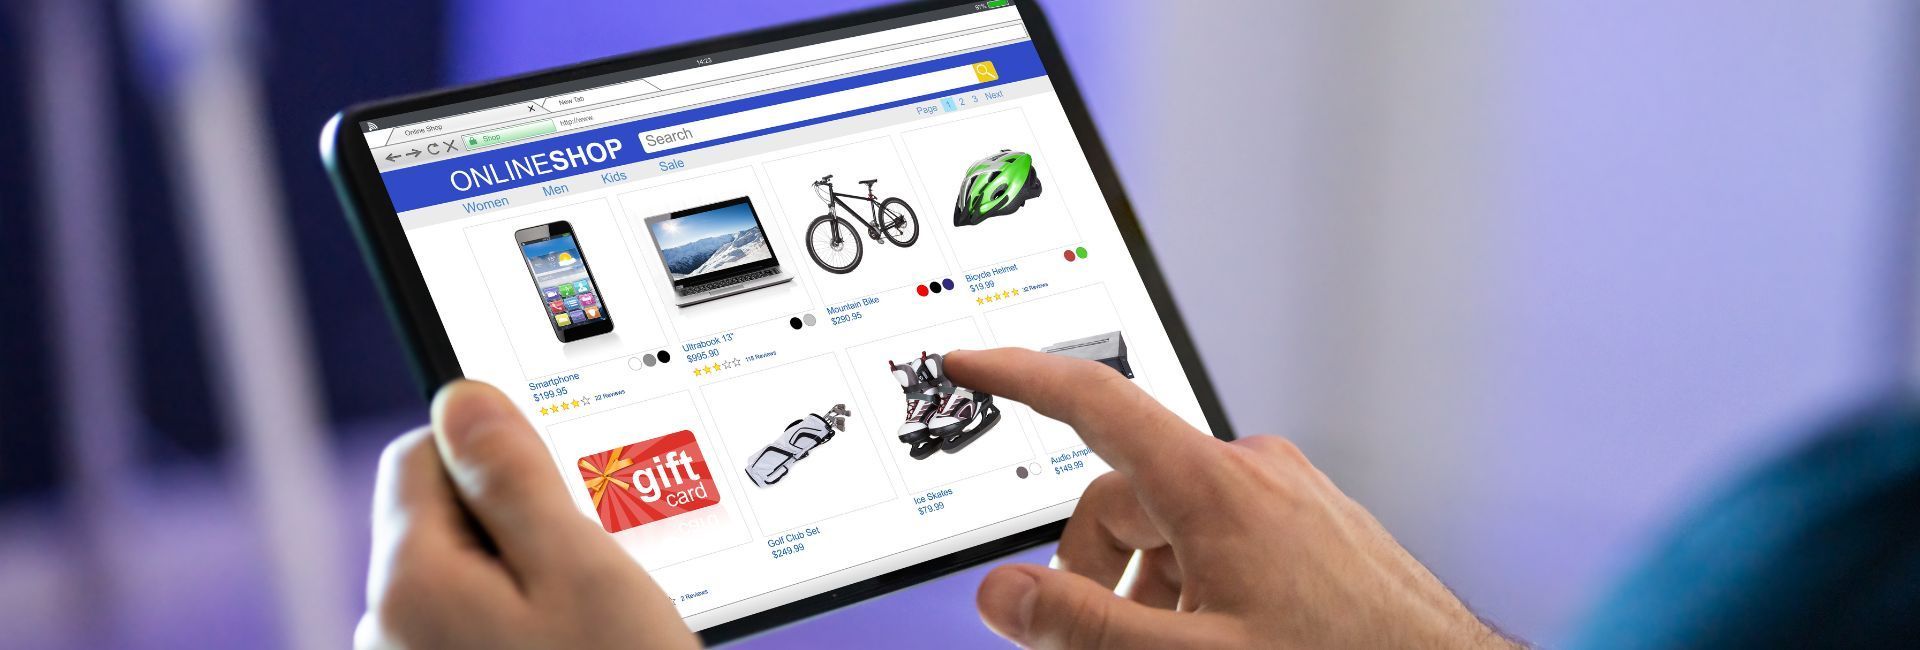 Image of a person holding a tablet, engaged in online ecommerce shopping, representing Rawlings Media's expertise in ecommerce solutions. The tablet screen displays a user-friendly online store interface, showcasing product listings and a seamless shopping experience for customers.